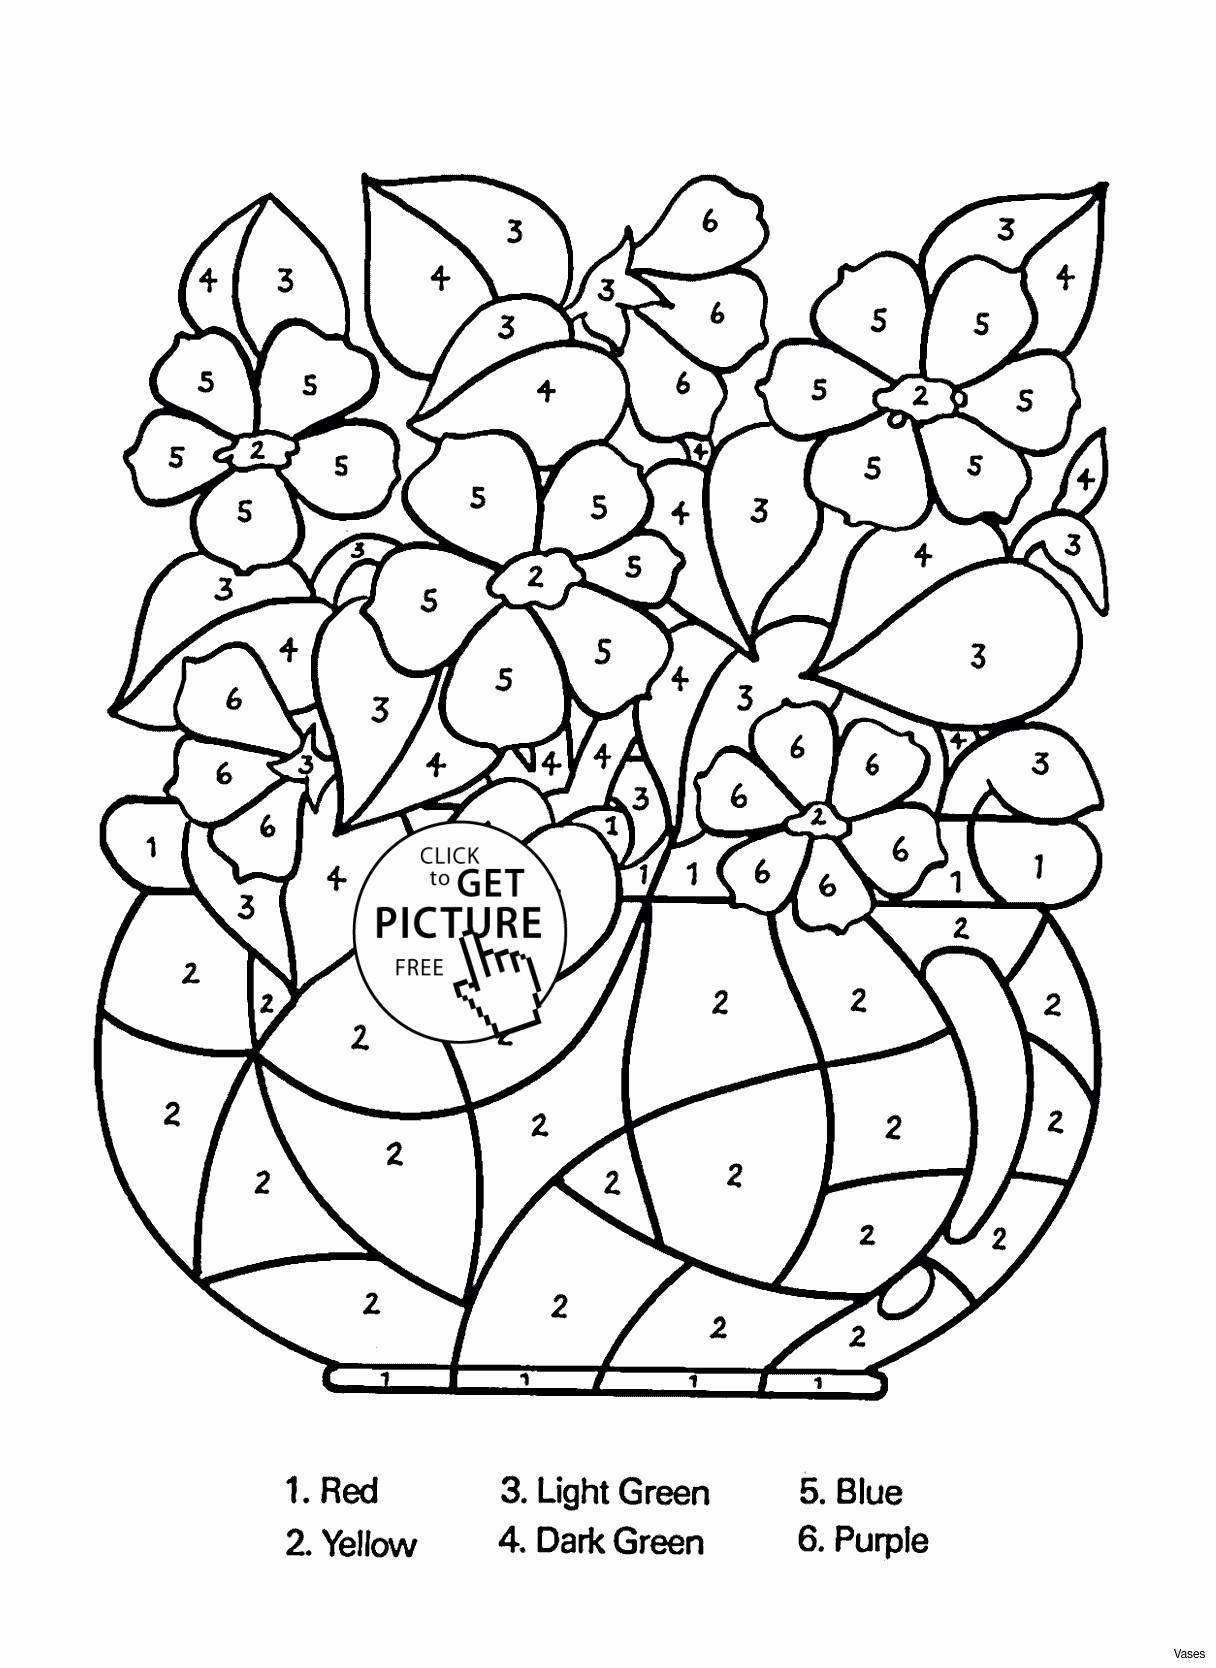 tall white glass vase of trippy vases www topsimages com for hippie sheets beautiful best vases flower vase coloring page pages flowers in a top i of